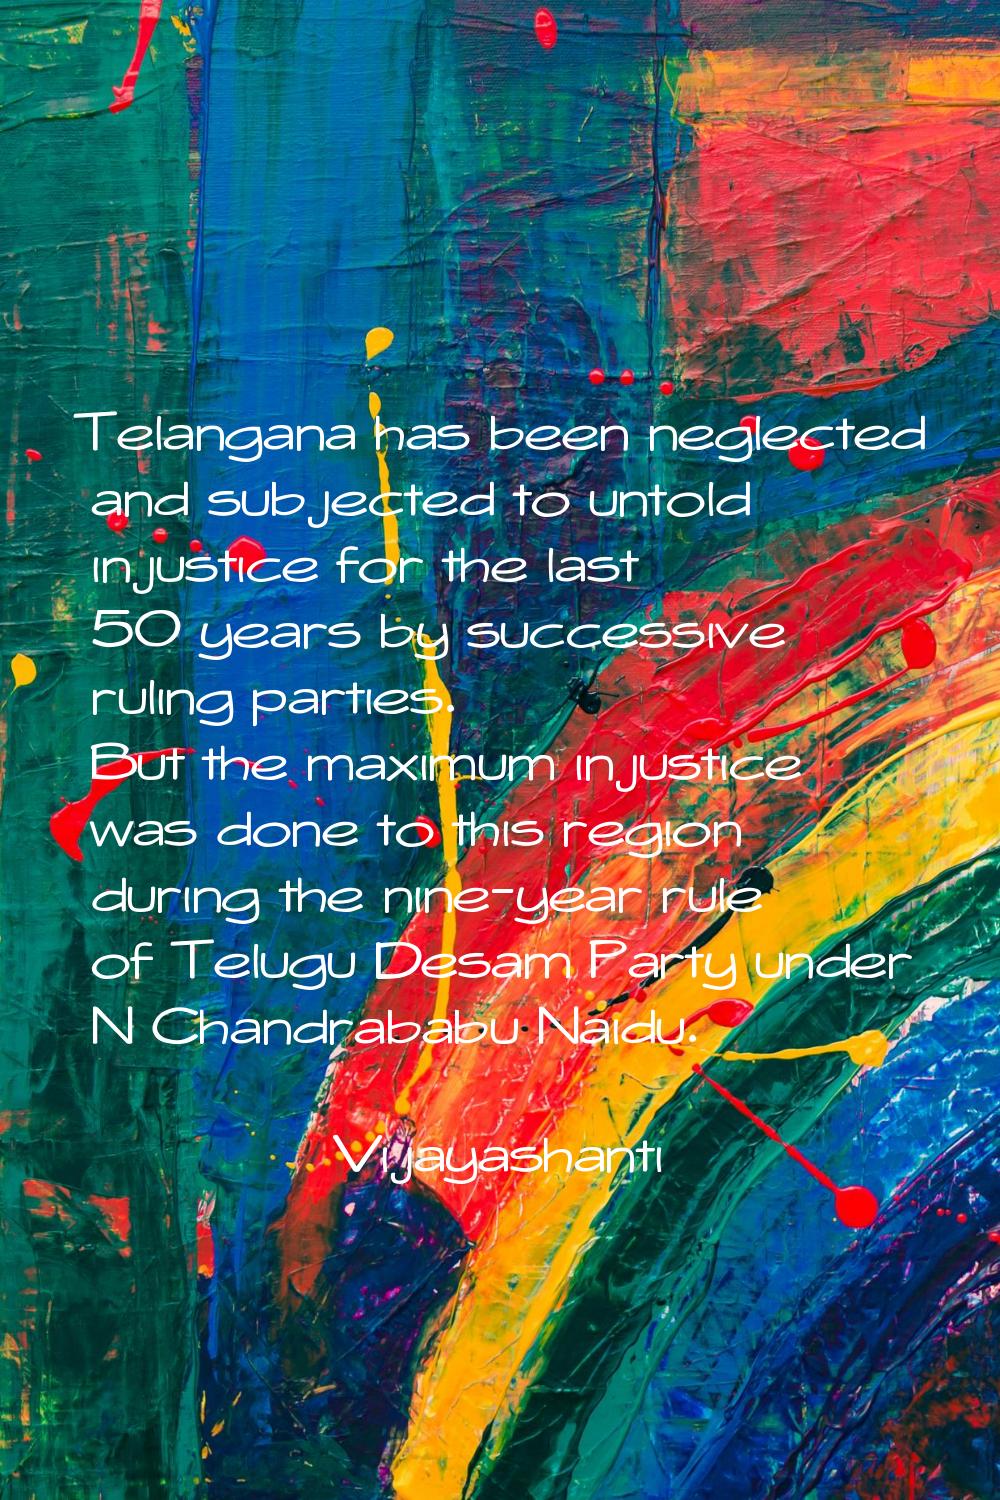 Telangana has been neglected and subjected to untold injustice for the last 50 years by successive 